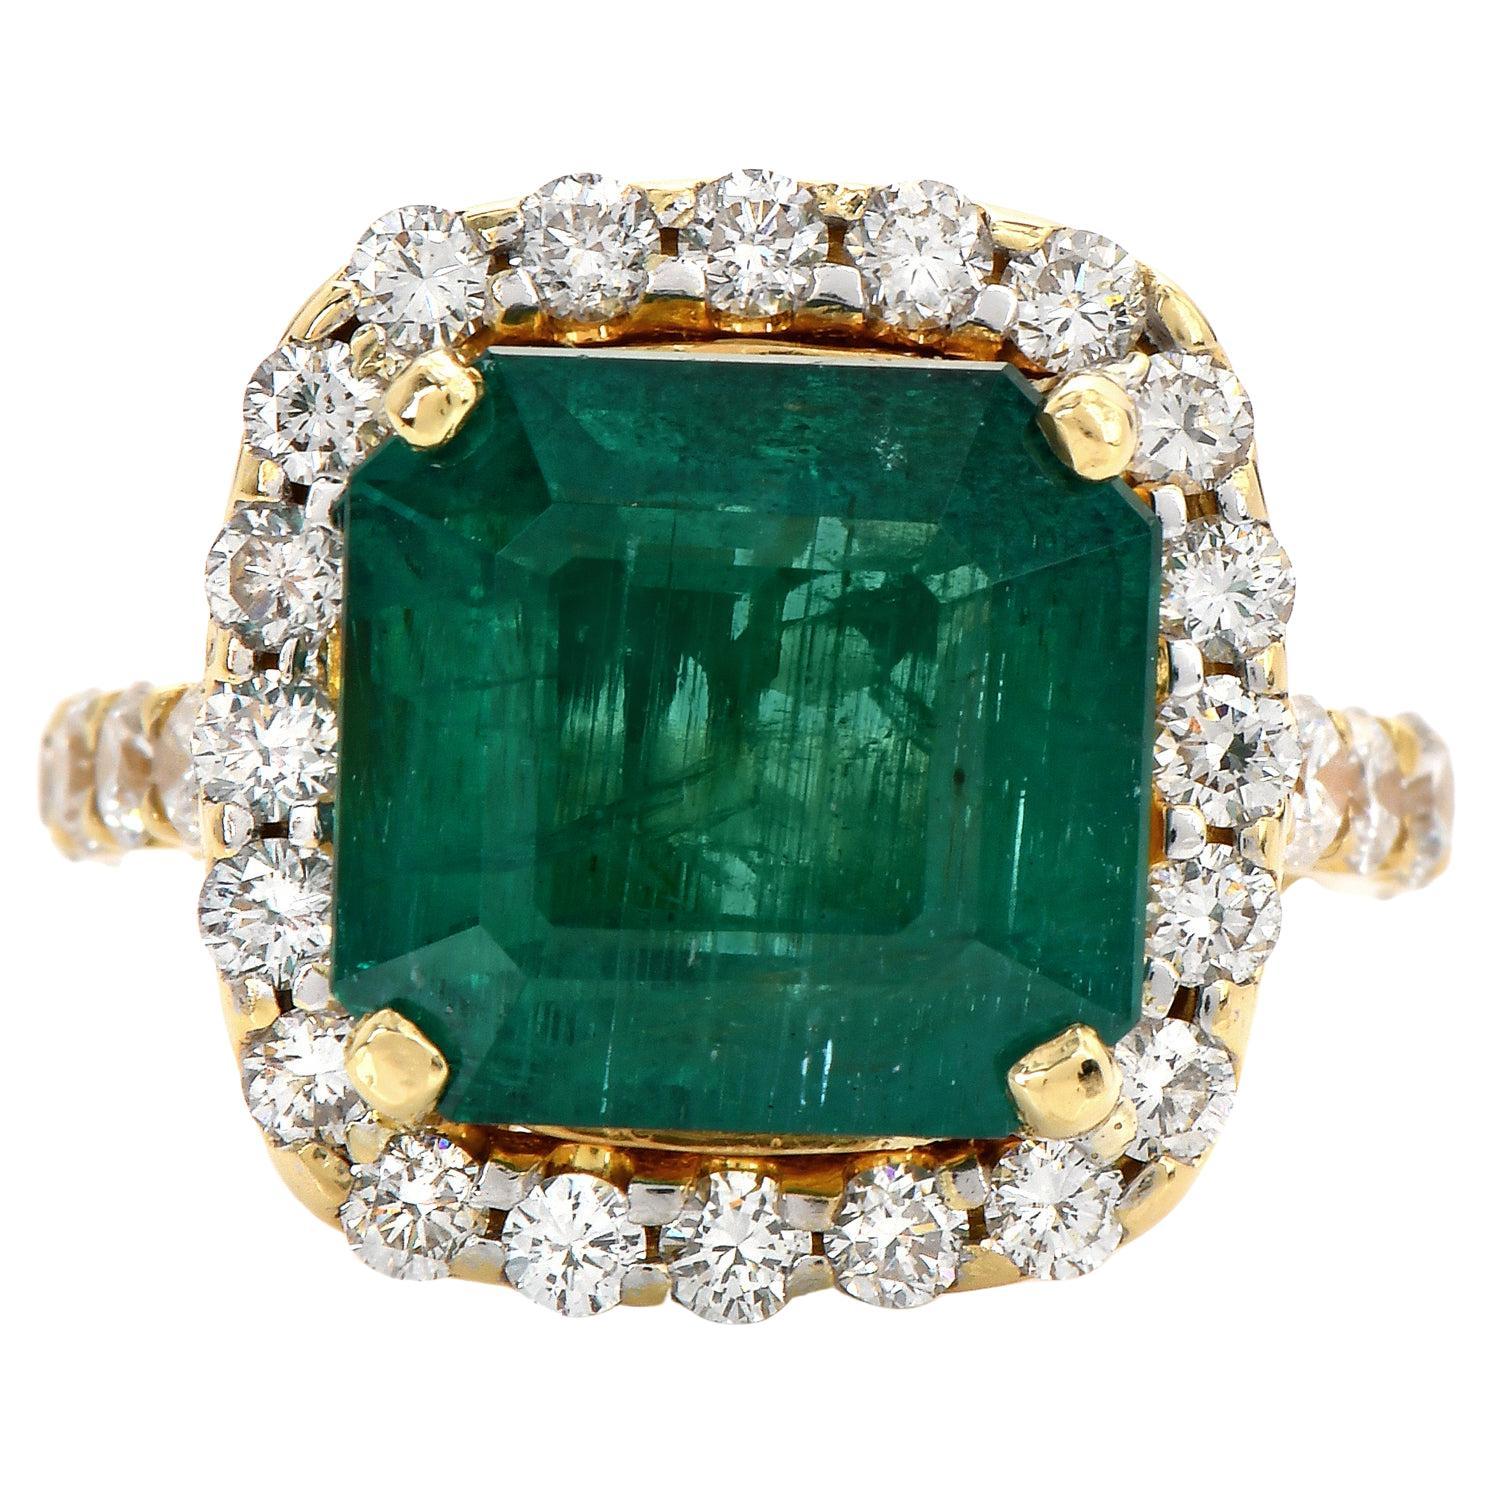 Imagine the sheer elegance and timeless beauty that awaits you with the Large Emerald and diamond ring.
The mesmerizing green hue of the center Genuine Emerald, Square emerald cut, weighing 8.08 carats;  combined with the brilliance of the